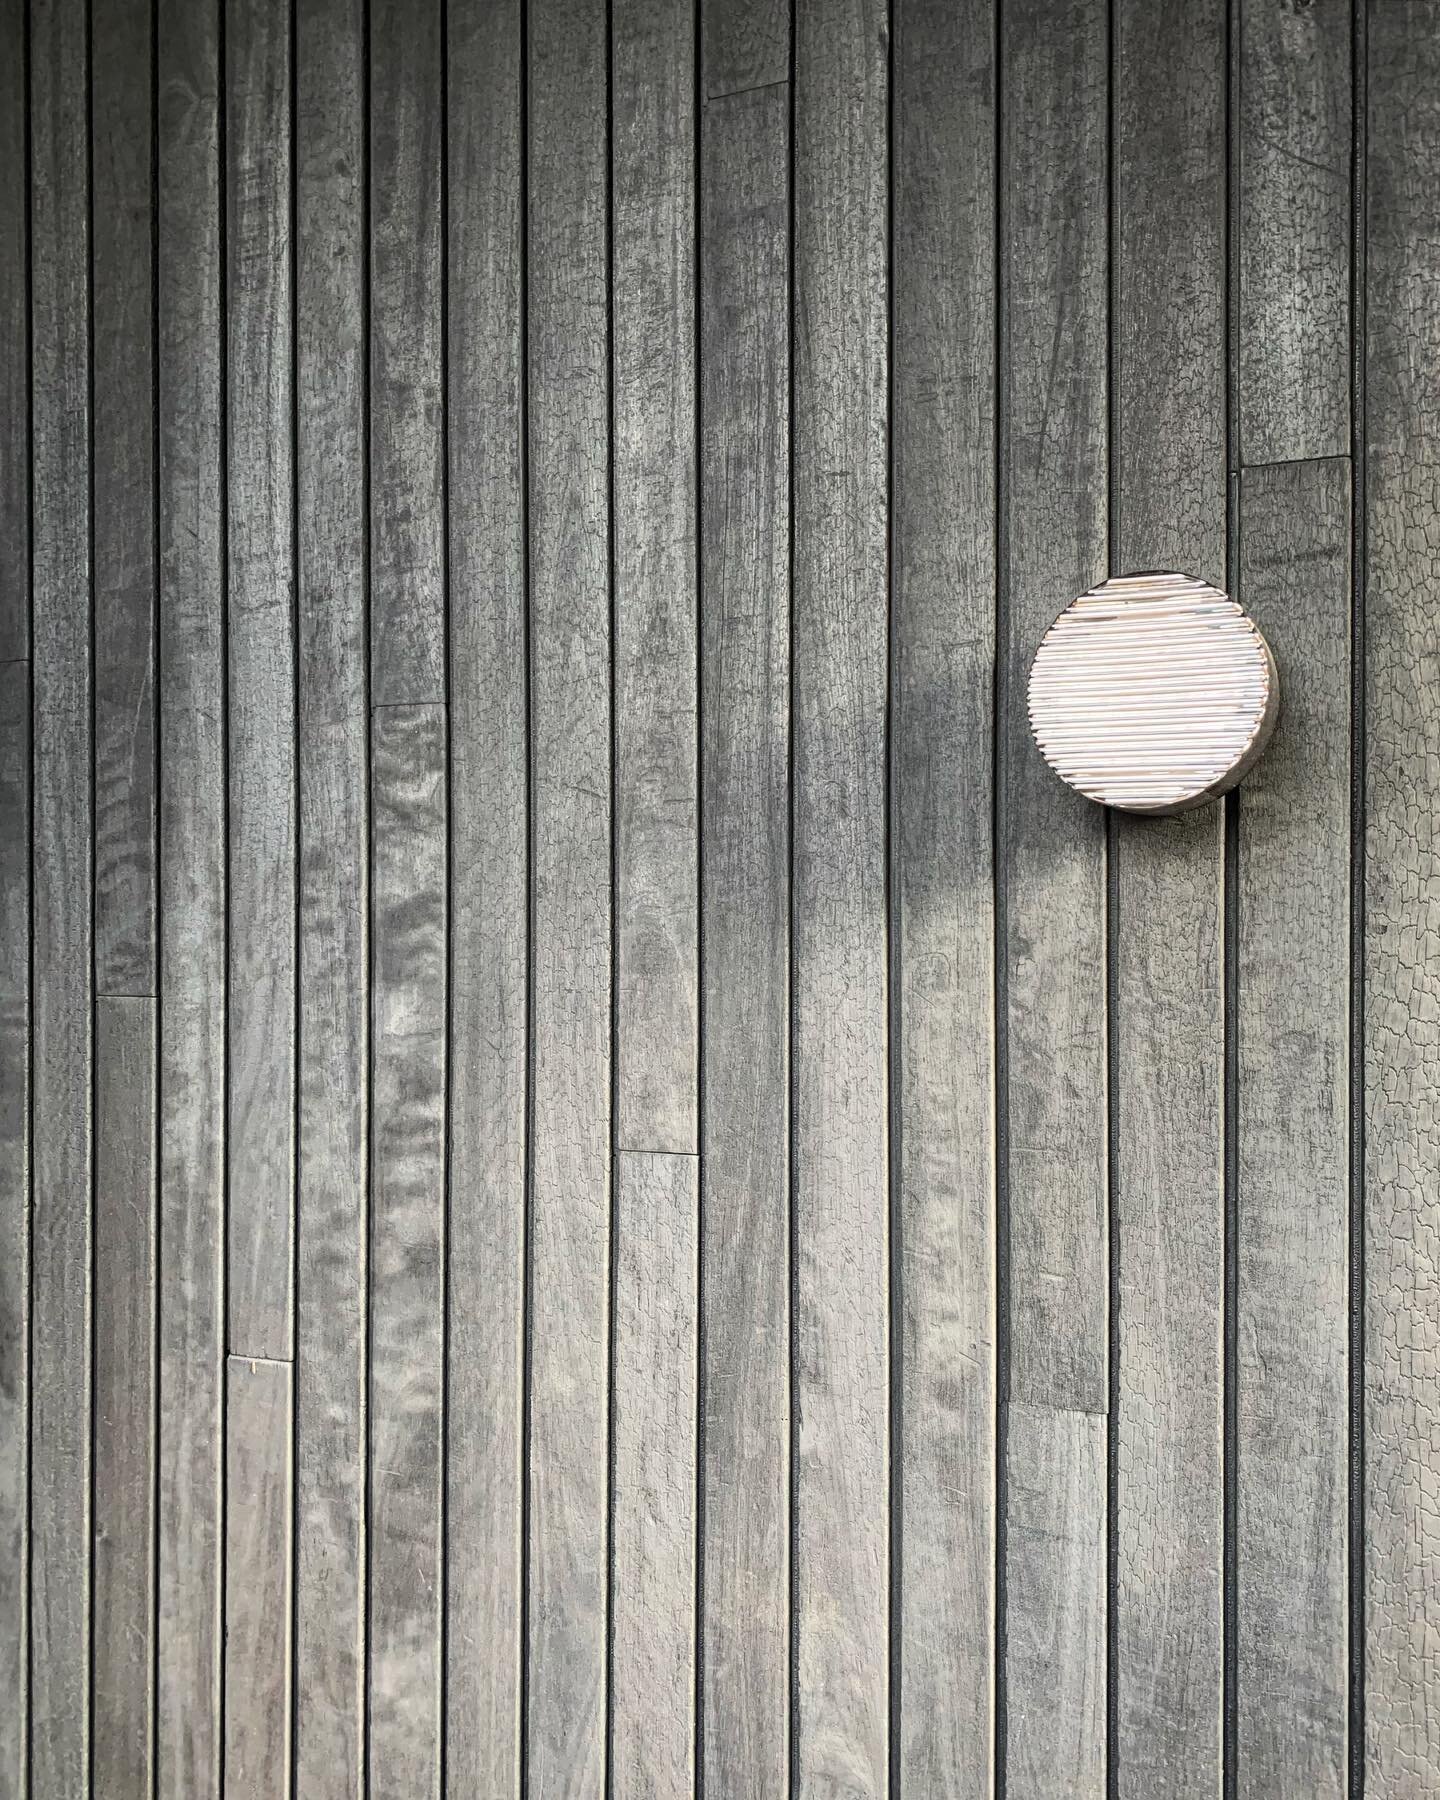 Monotones at the tree house entry

#sugiban #charredwood #timbercladding #architecture #entry #walllight #texture #light #welcome #craft #design #sutherlandshire #yowie #sydney